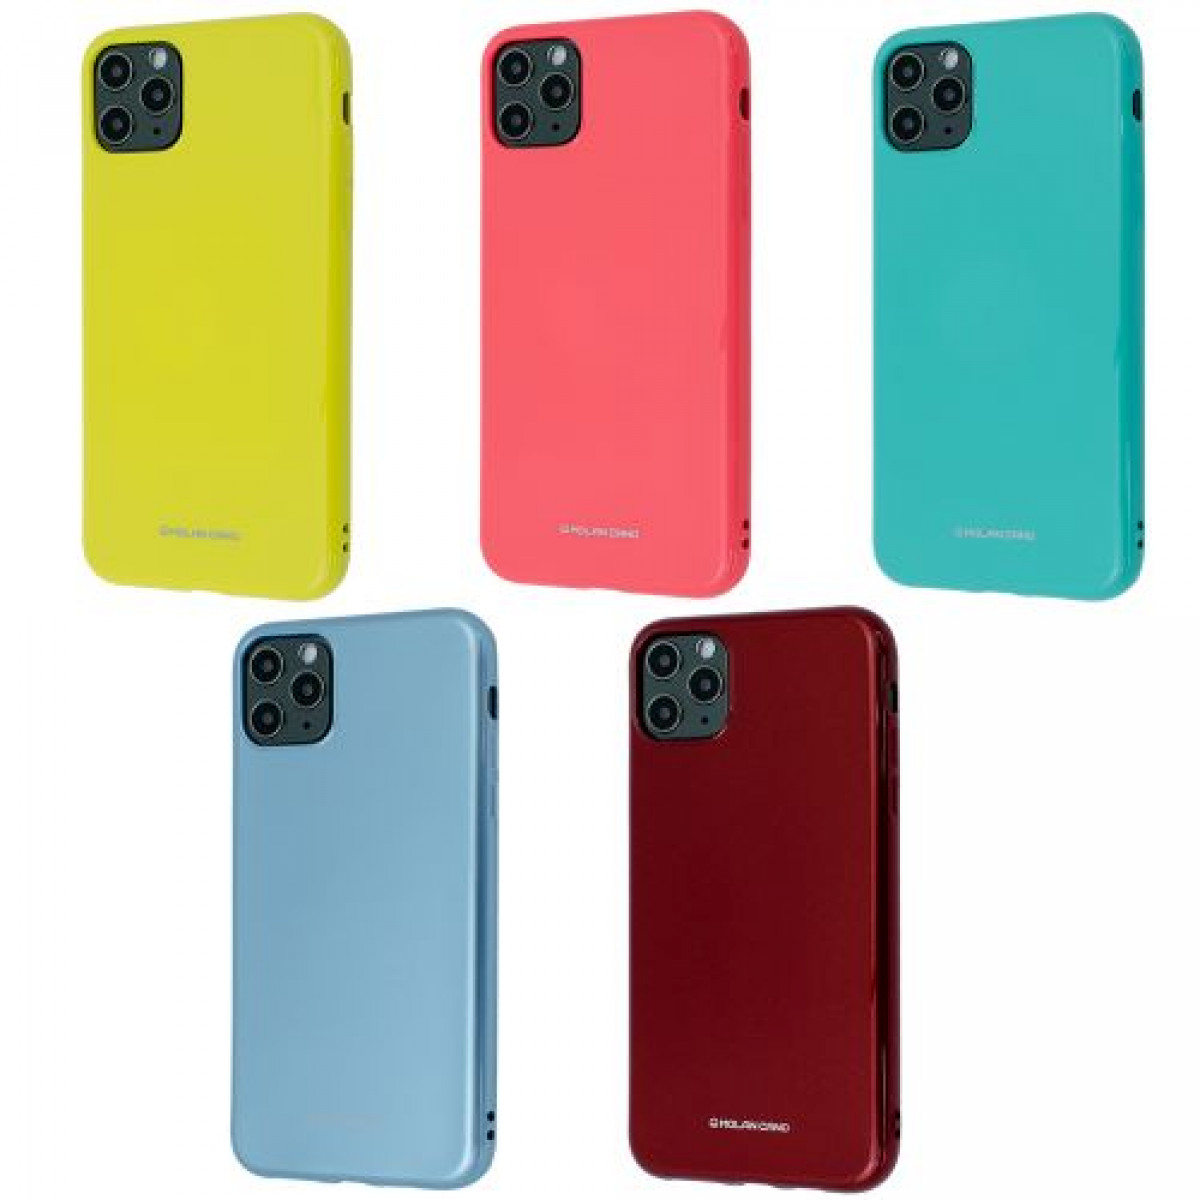 Molan Cano Pearl Jelly Series Case for iPhone 11 Pro Max